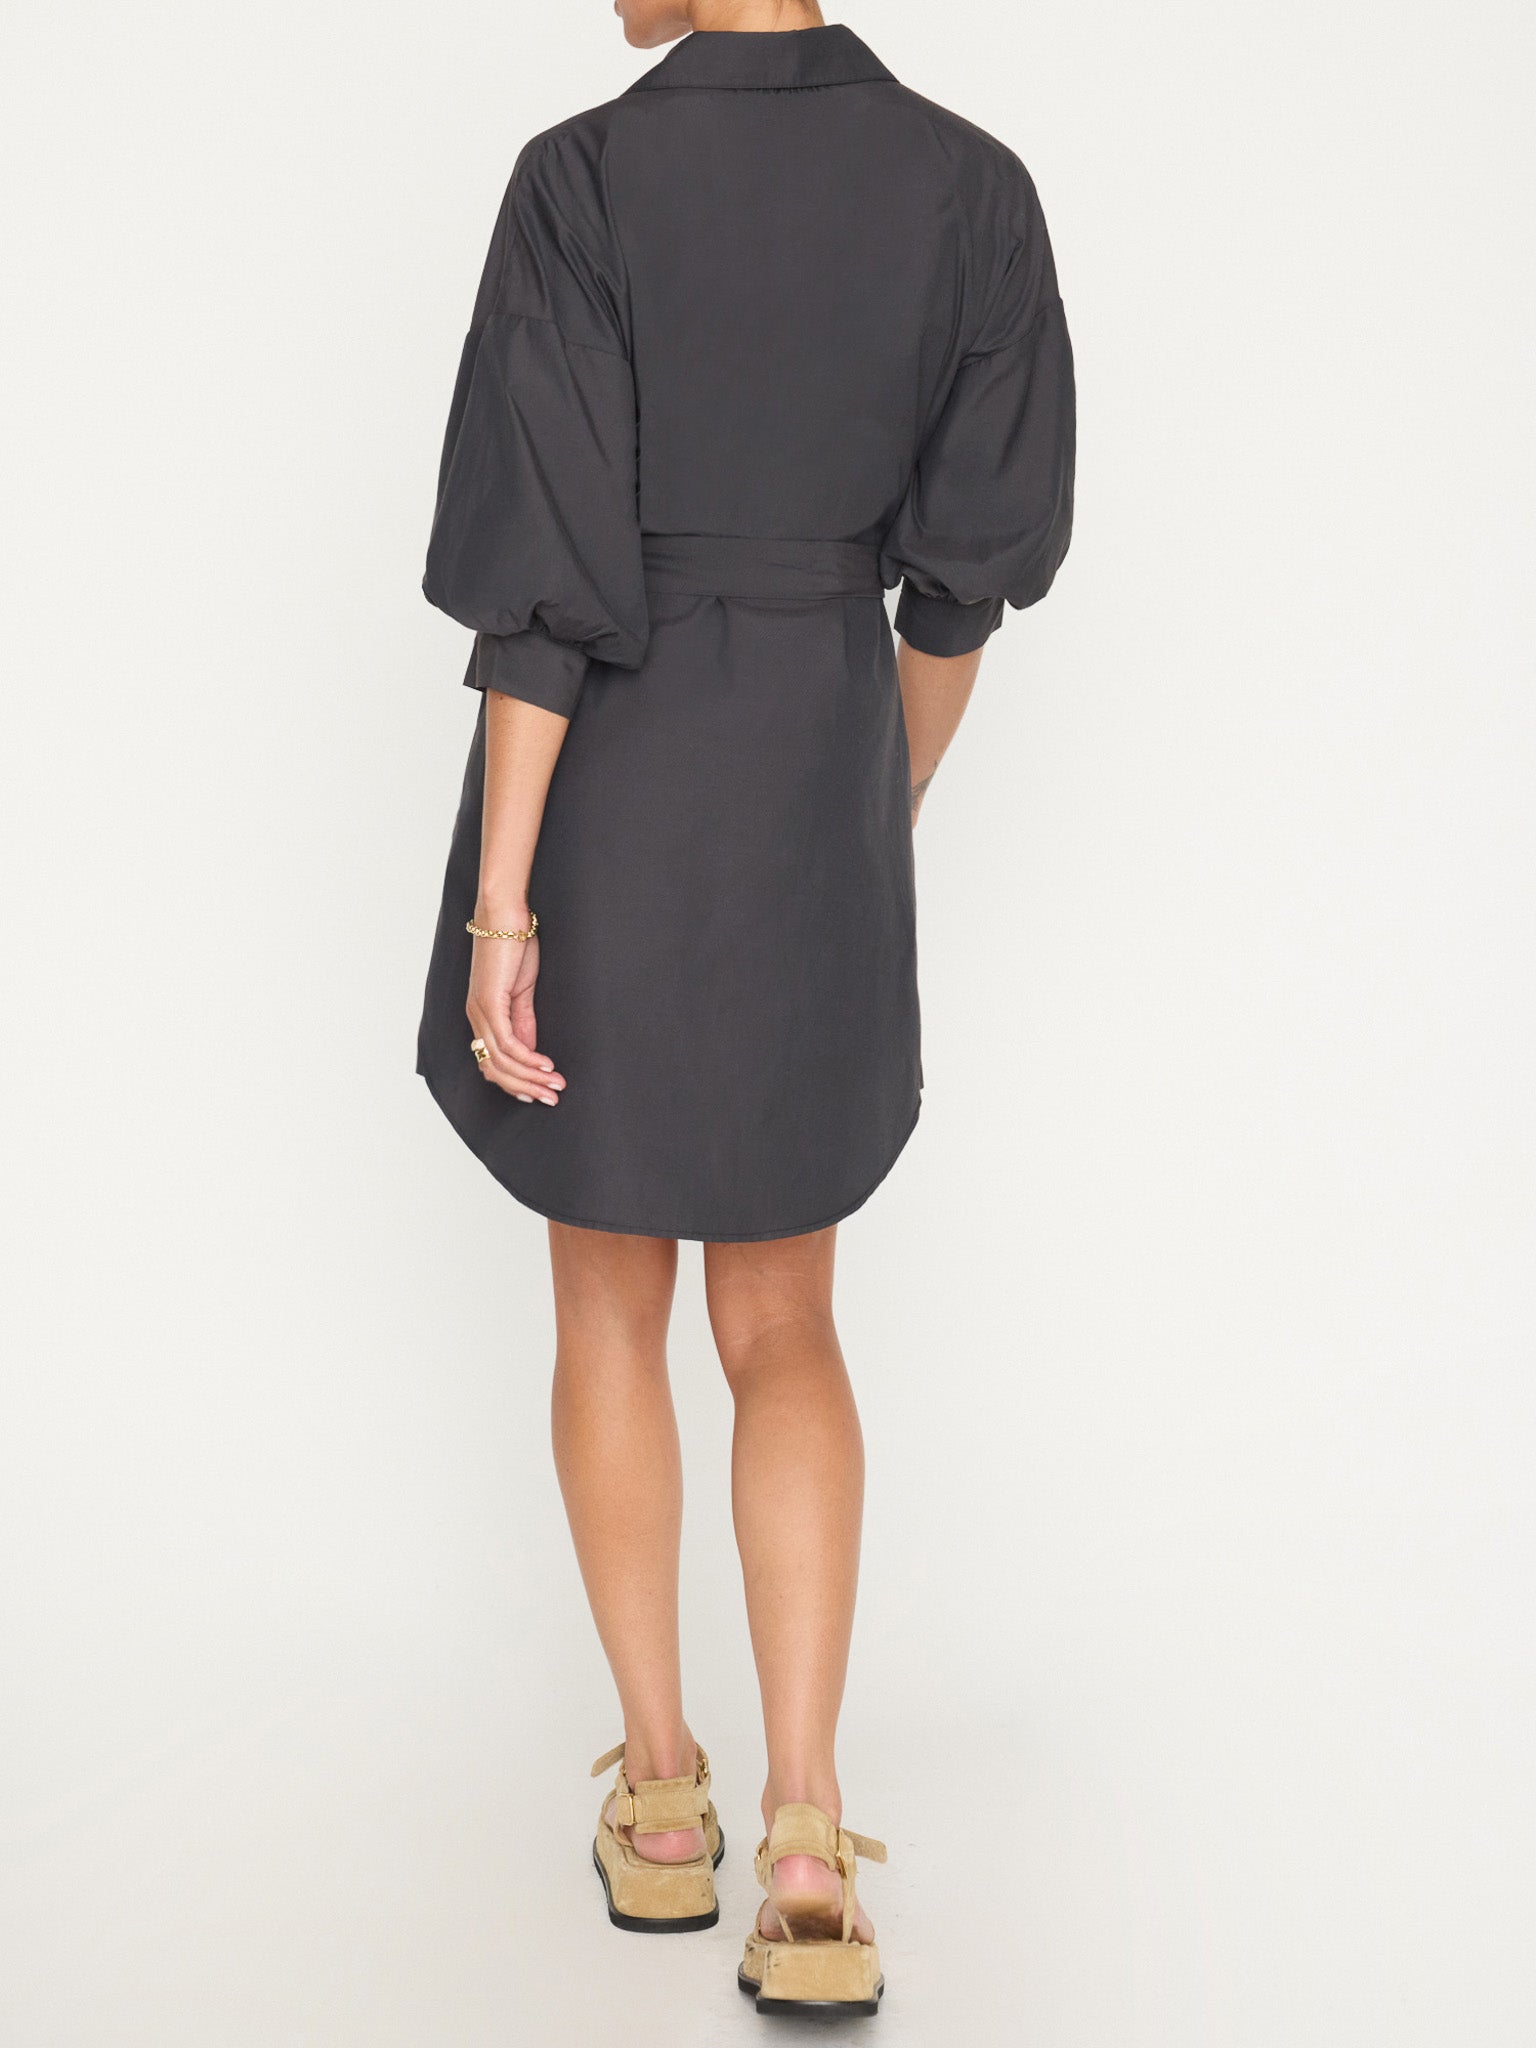 Kate belted button up mini dress black back view